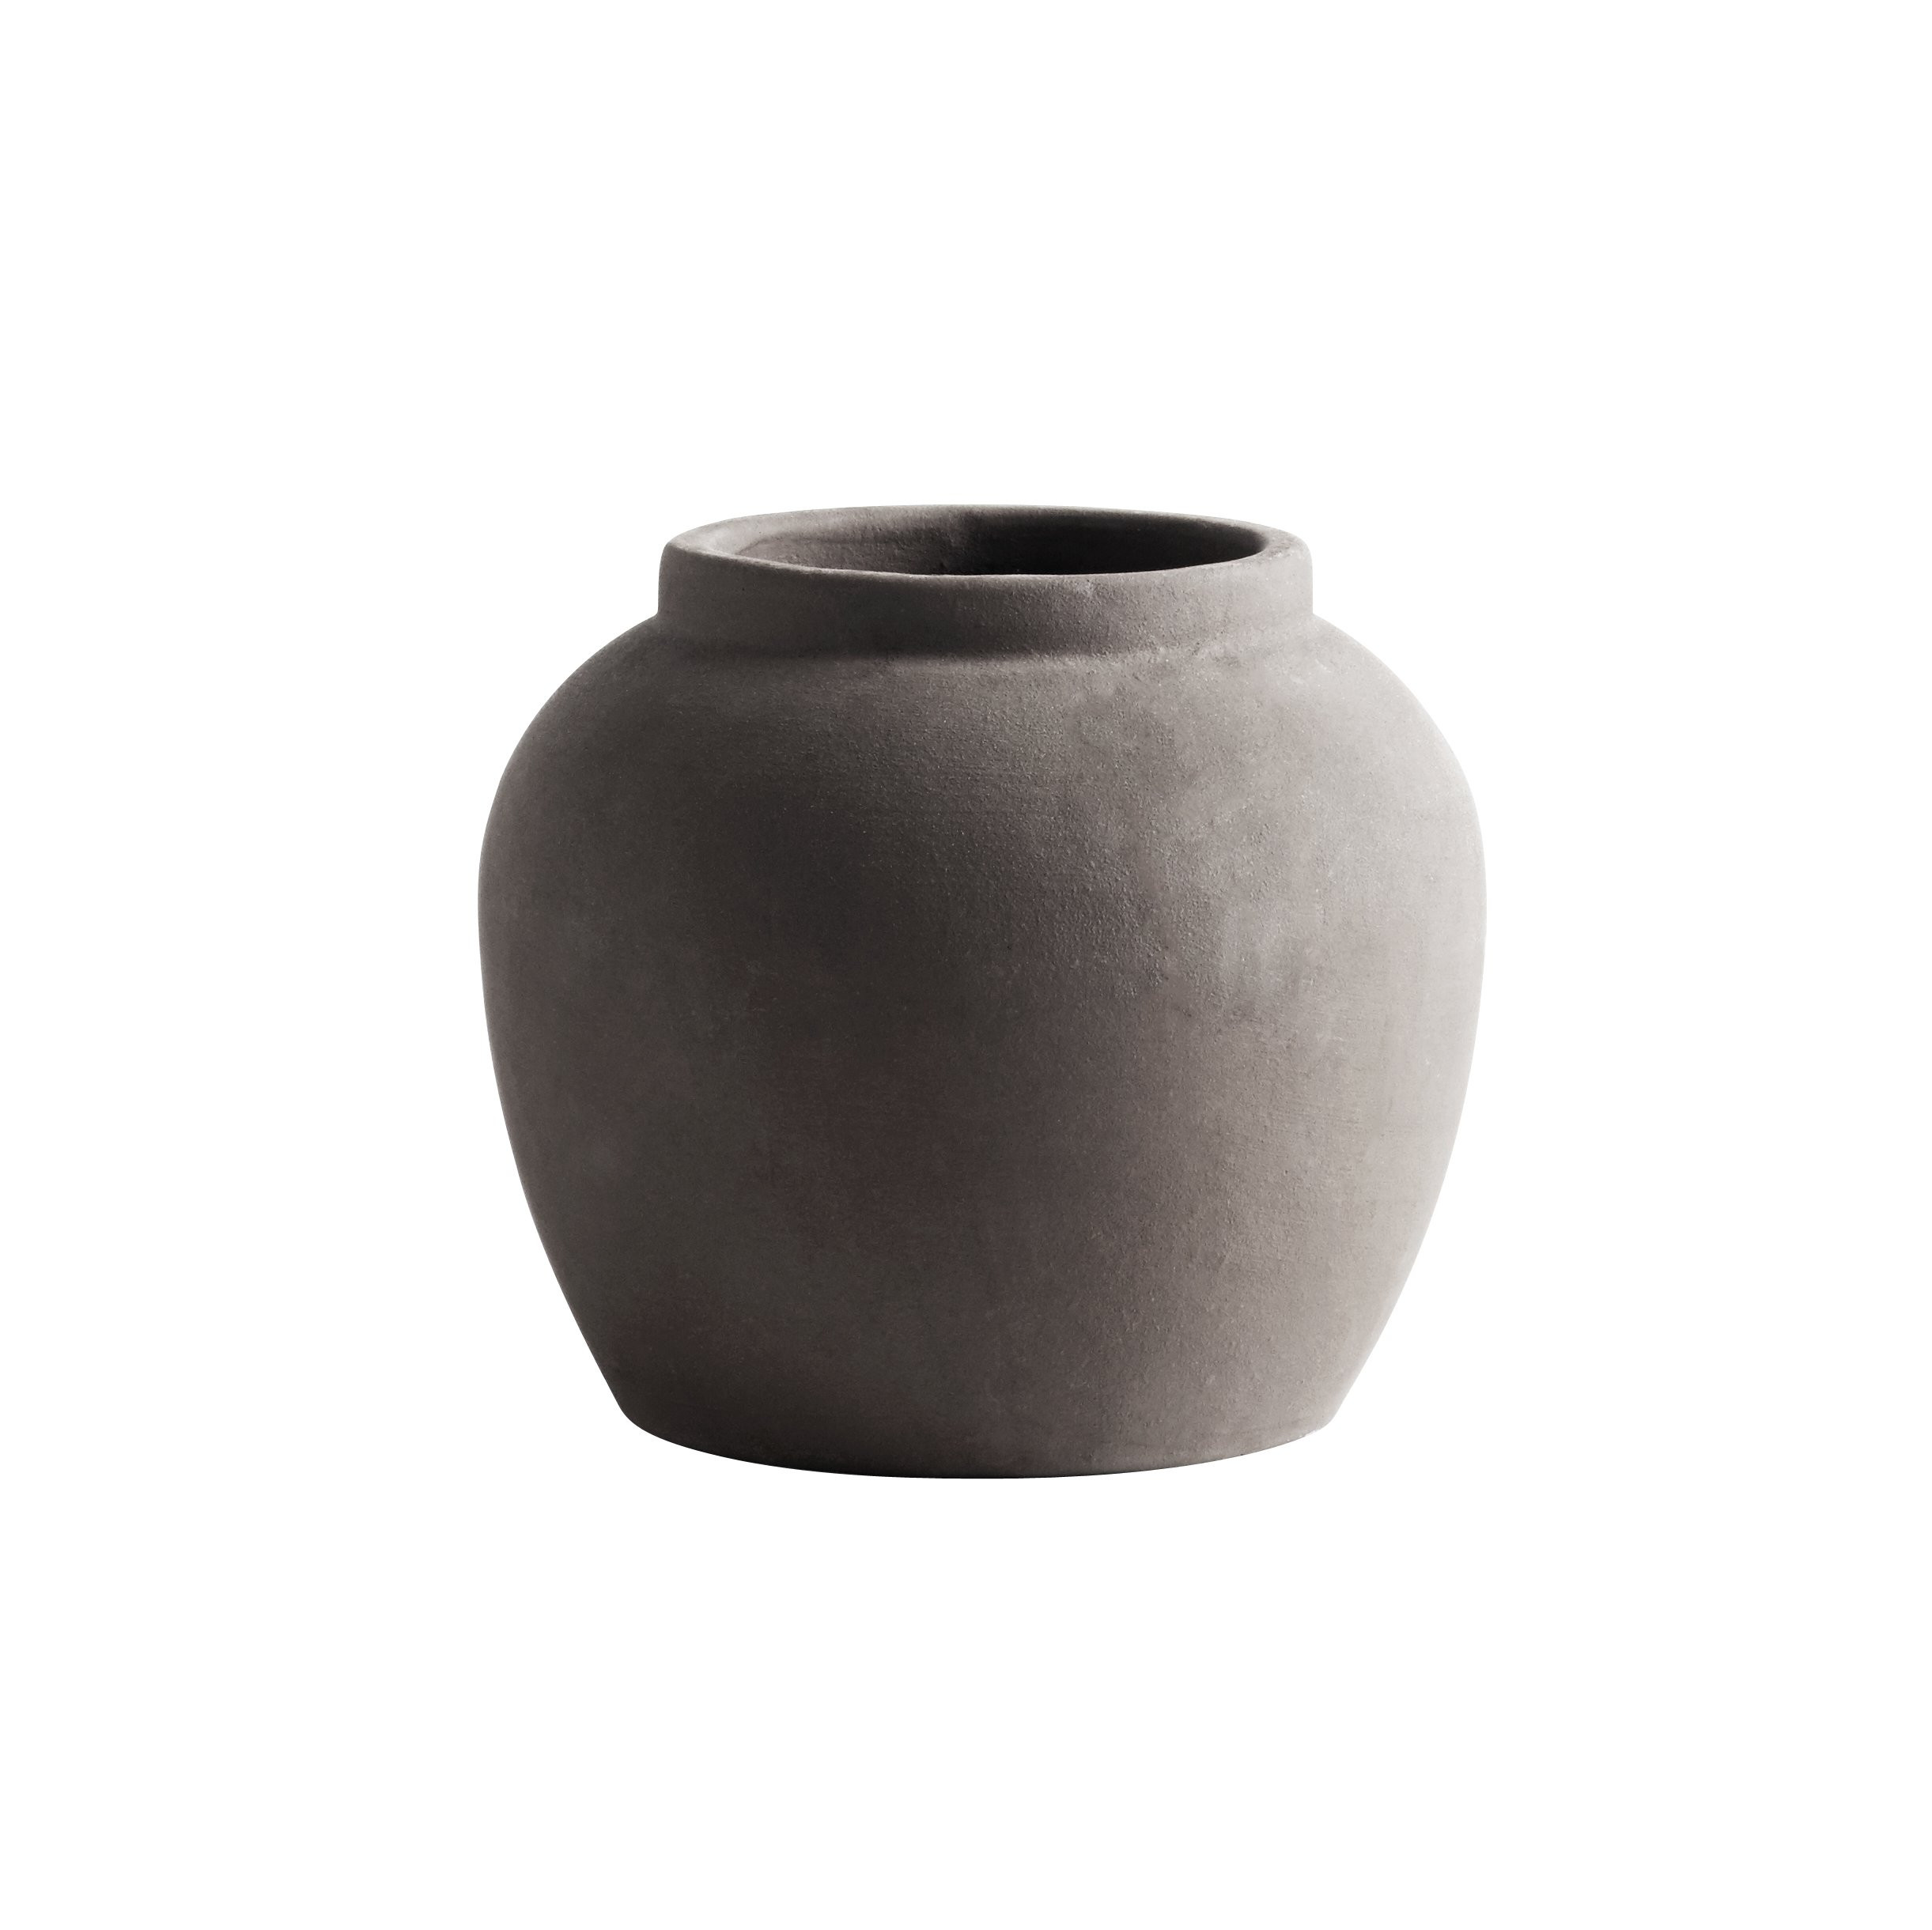 24 Great Large White Urn Vase 2024 free download large white urn vase of jar clay s d18xh24 smoke products tine k home inside jarvase s smo